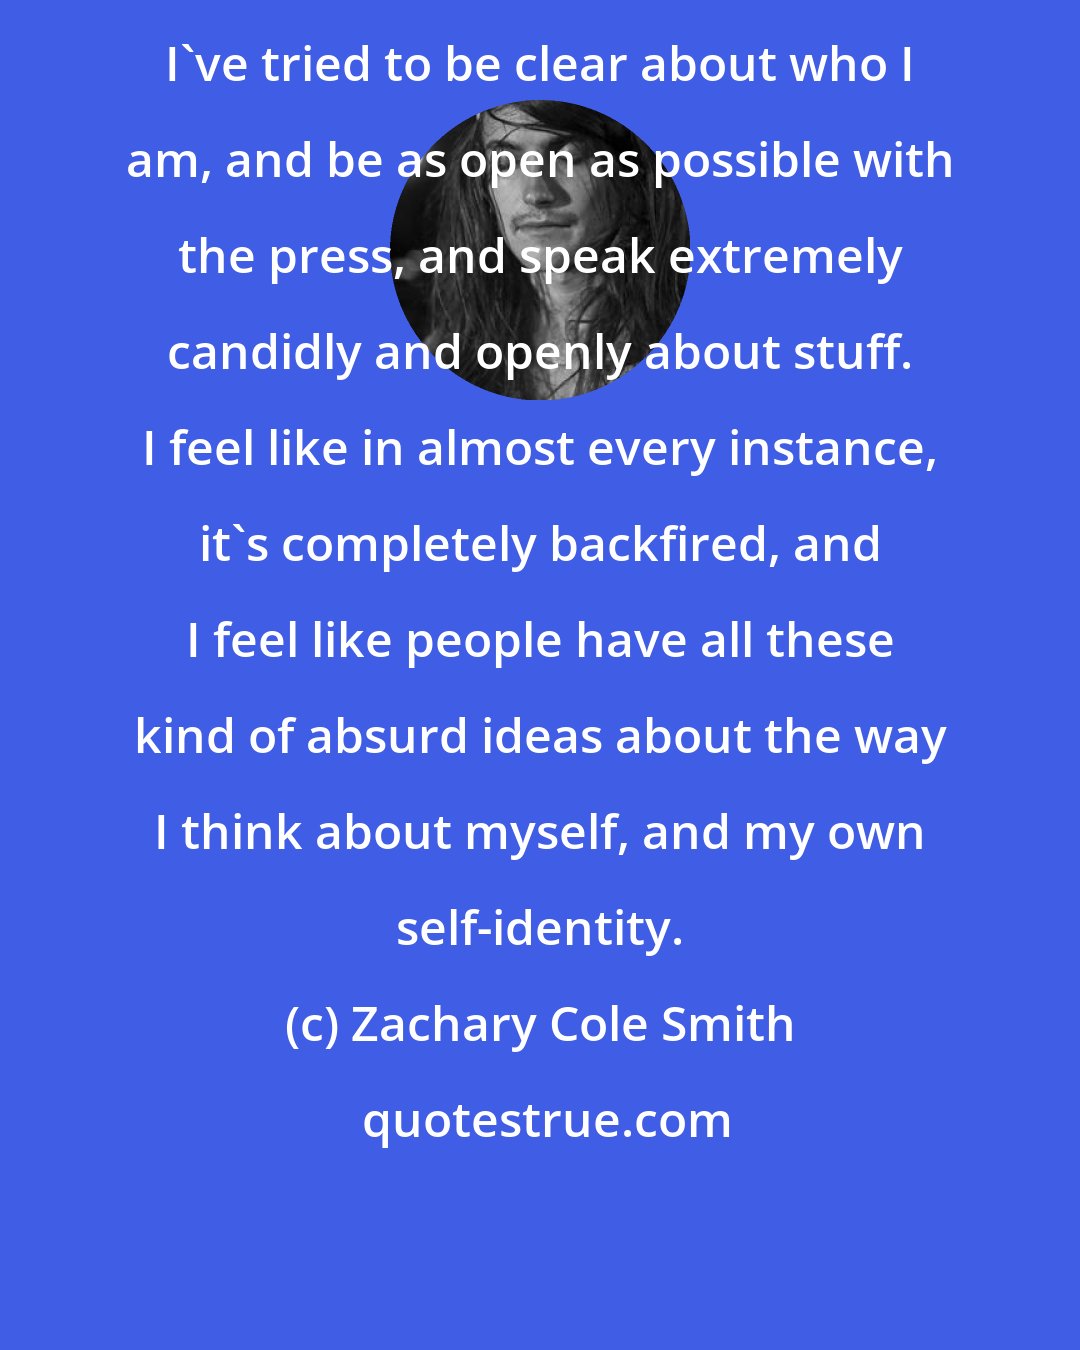 Zachary Cole Smith: I've tried to be clear about who I am, and be as open as possible with the press, and speak extremely candidly and openly about stuff. I feel like in almost every instance, it's completely backfired, and I feel like people have all these kind of absurd ideas about the way I think about myself, and my own self-identity.